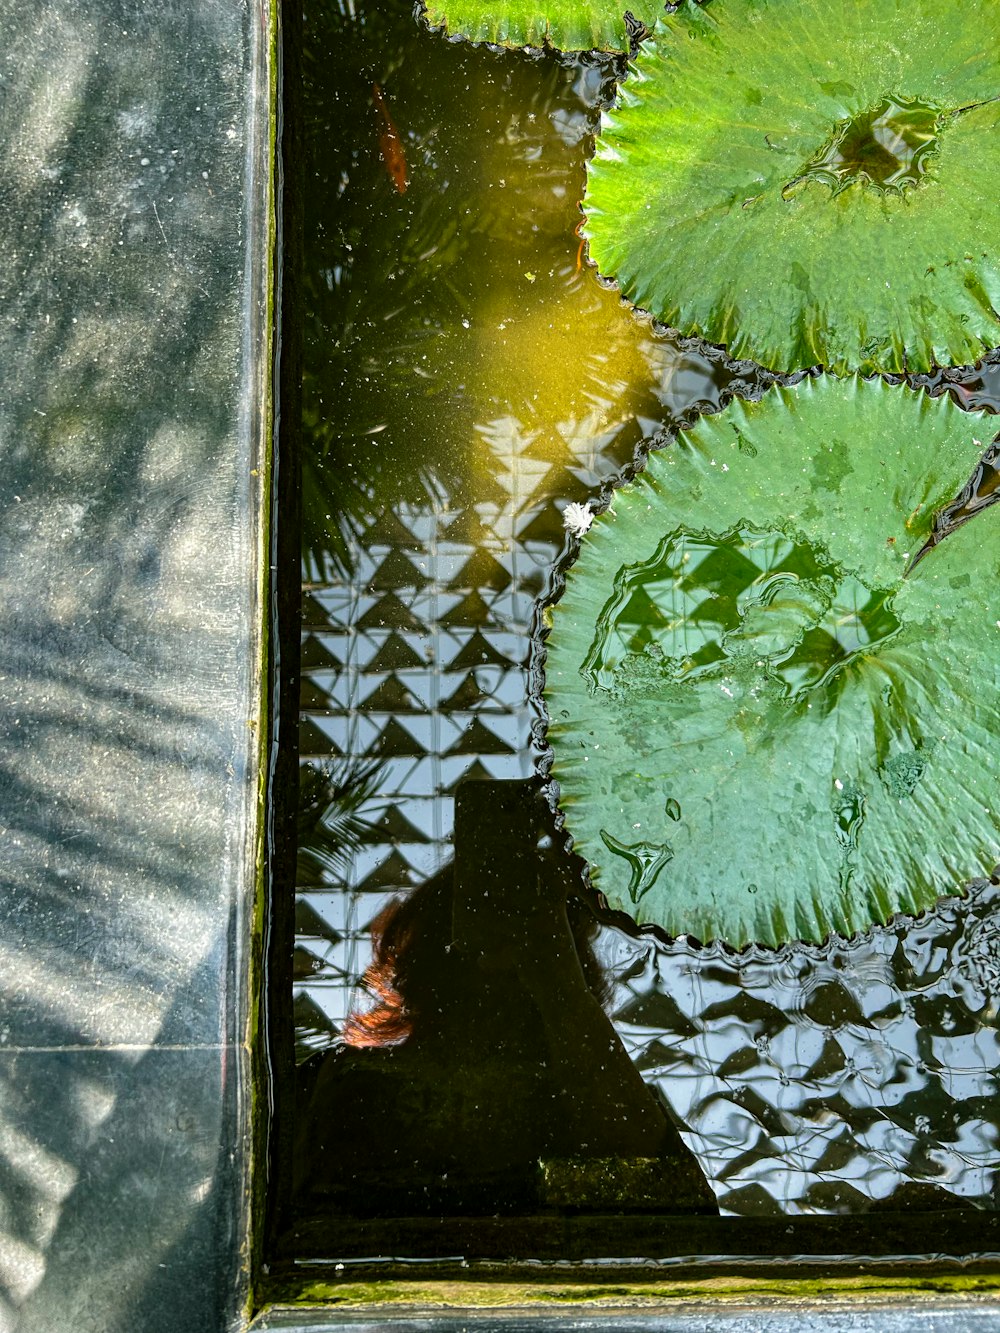 a pond filled with water lilies and green leaves